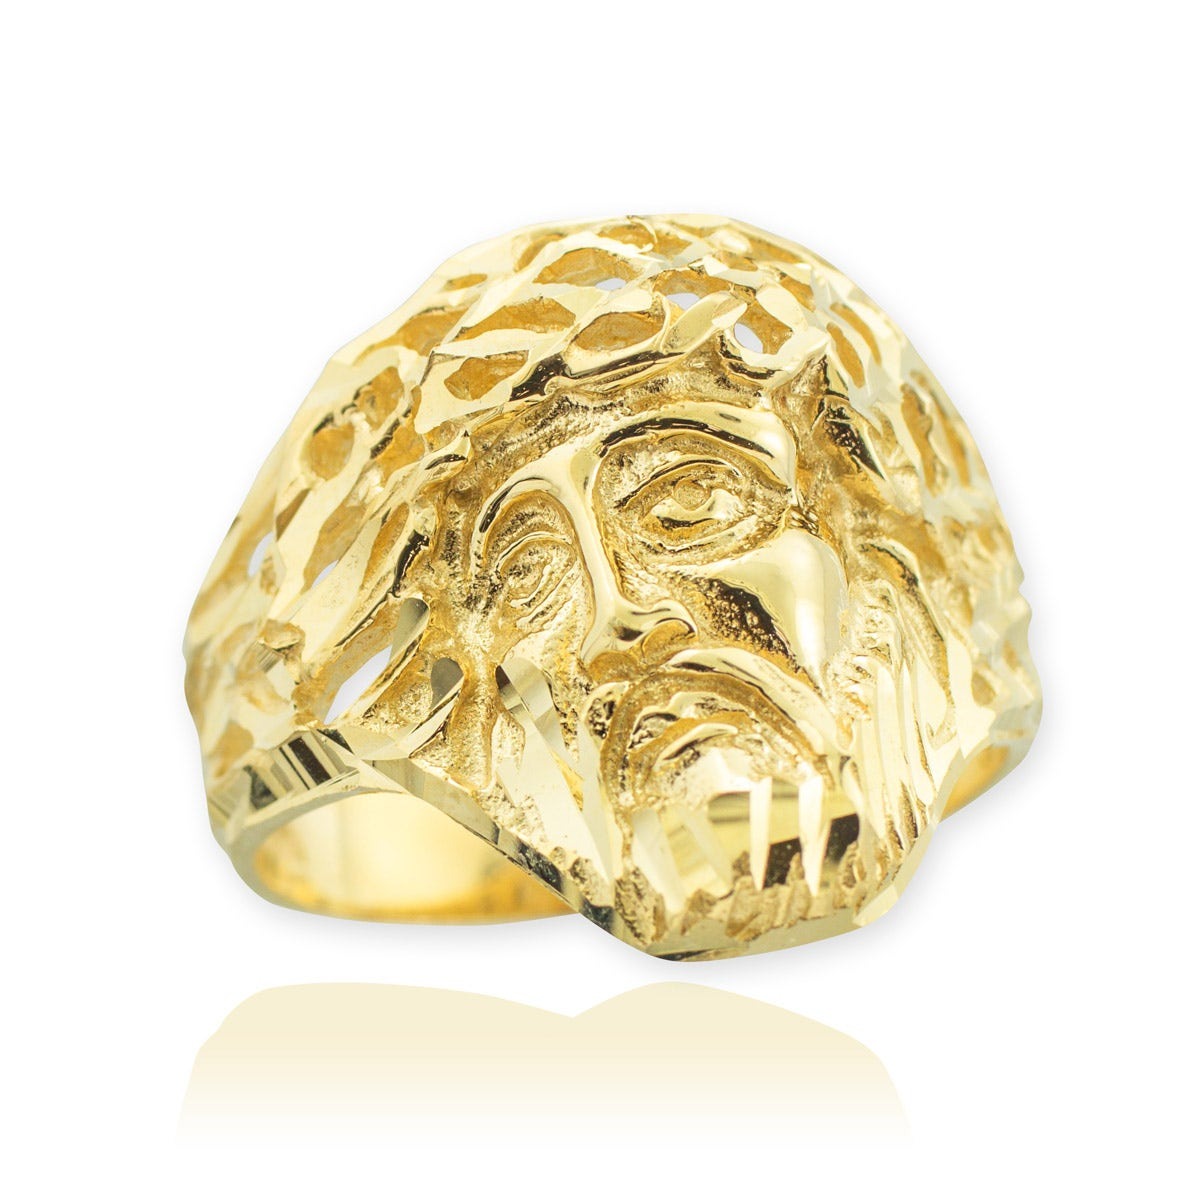 Gold Gents Ring - Gold Boutique GOOFASH